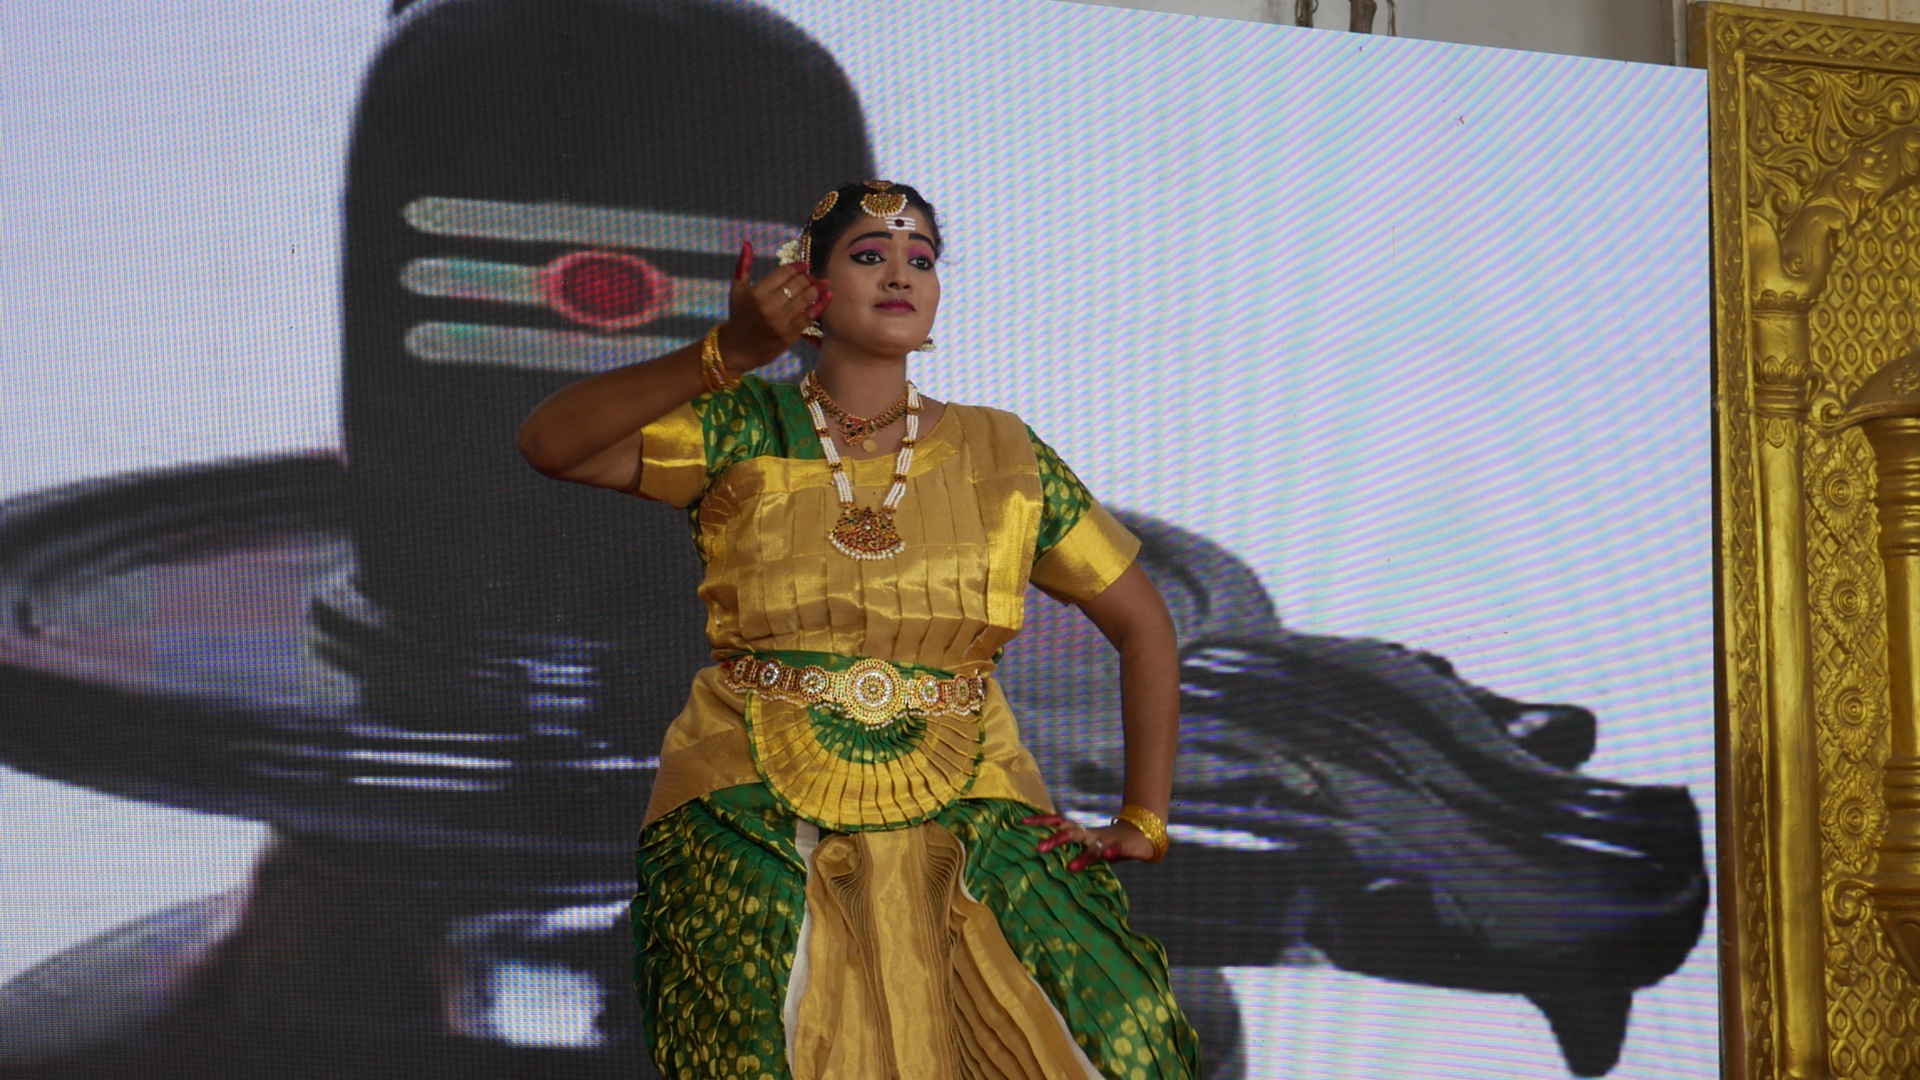 Bharatanatyam performance for 3 consecutive hours about  63 Nayanars through music and dance